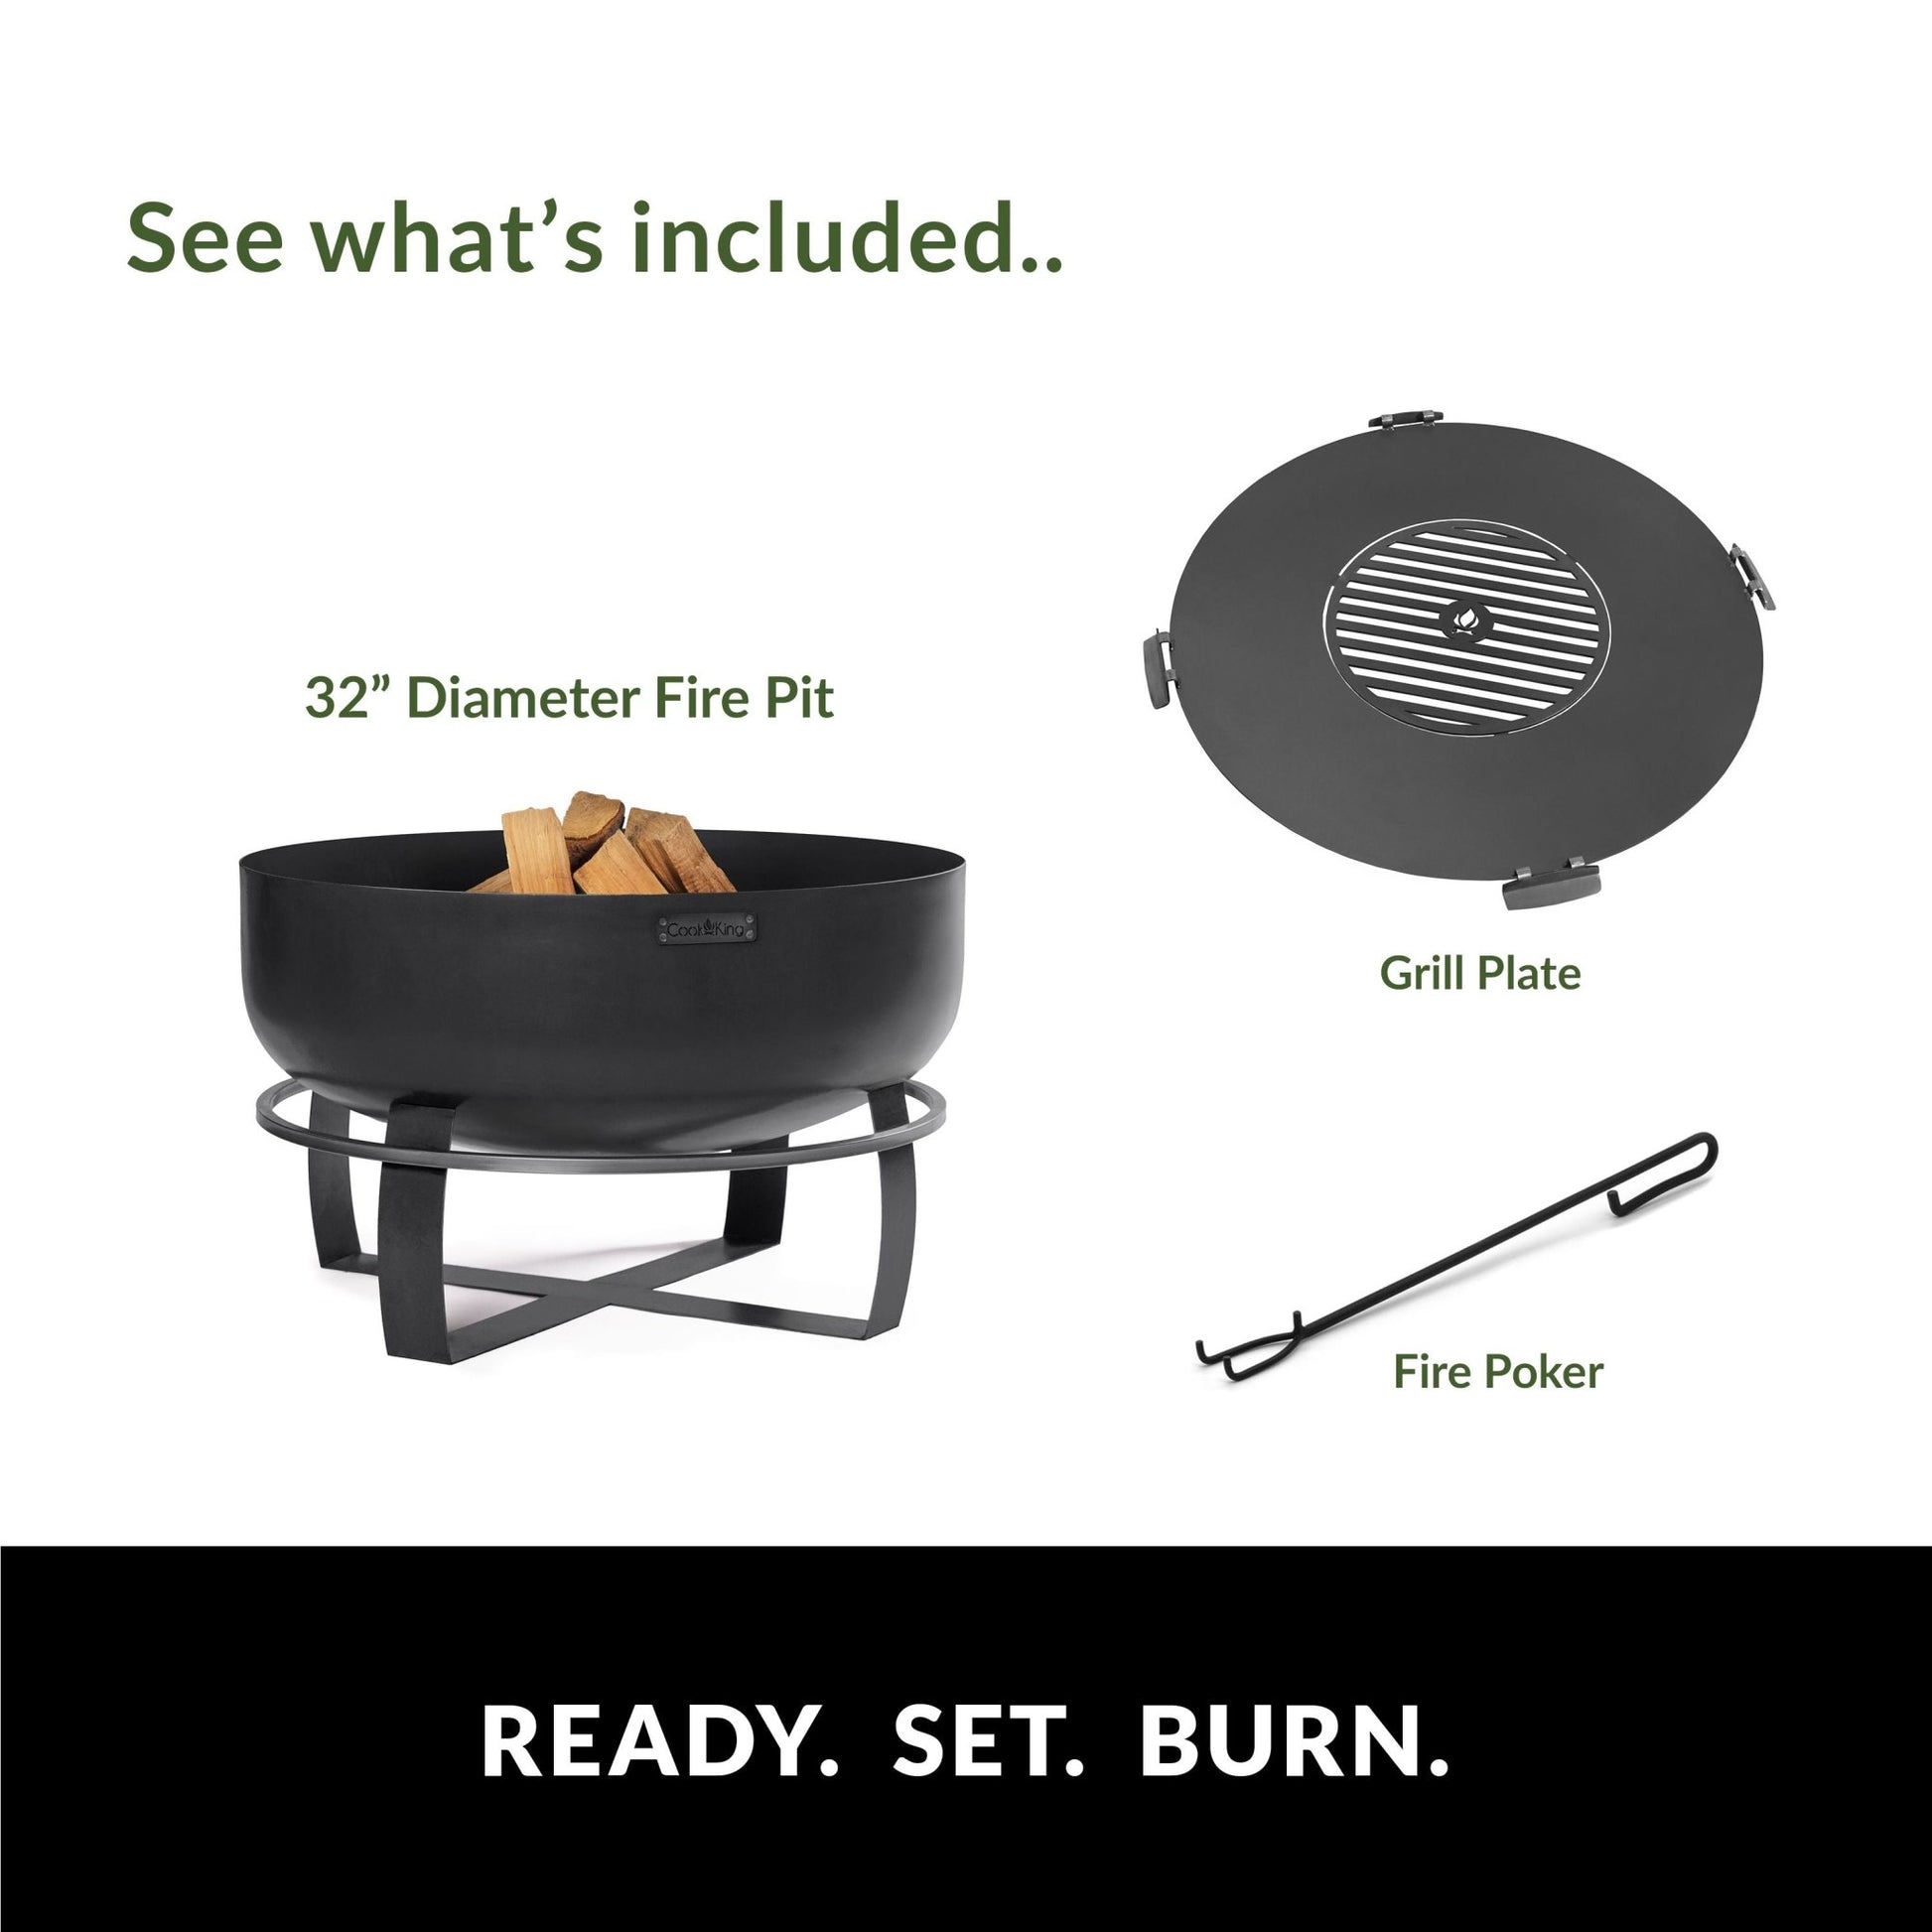 Ignition 32" XXL Fire Pit with Grill Plate - Good Directions